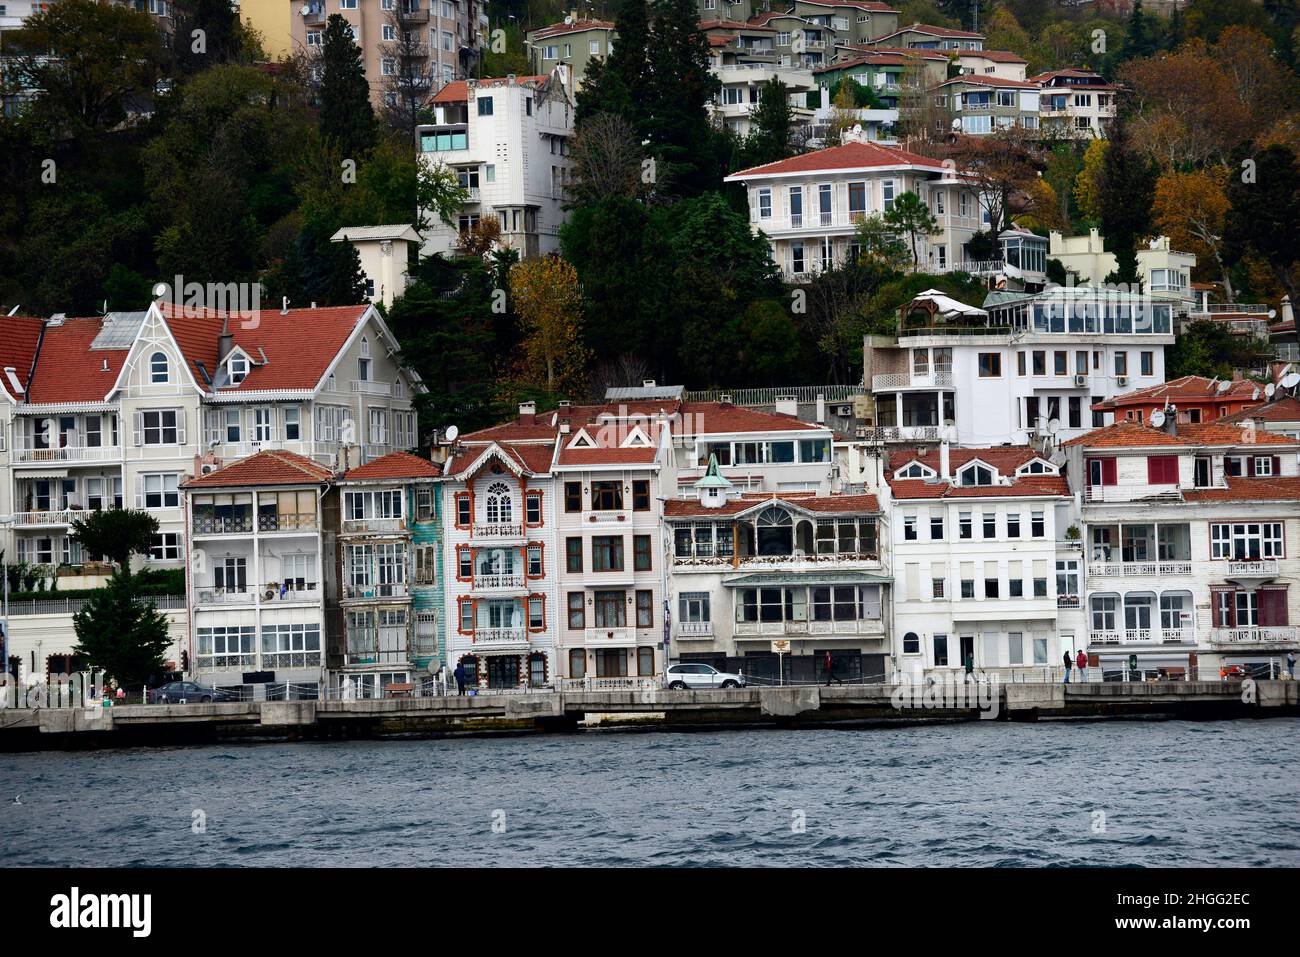 A view of Arnavutköy from the Bosphorus Strait in Istanbul, Turkey. Stock Photo